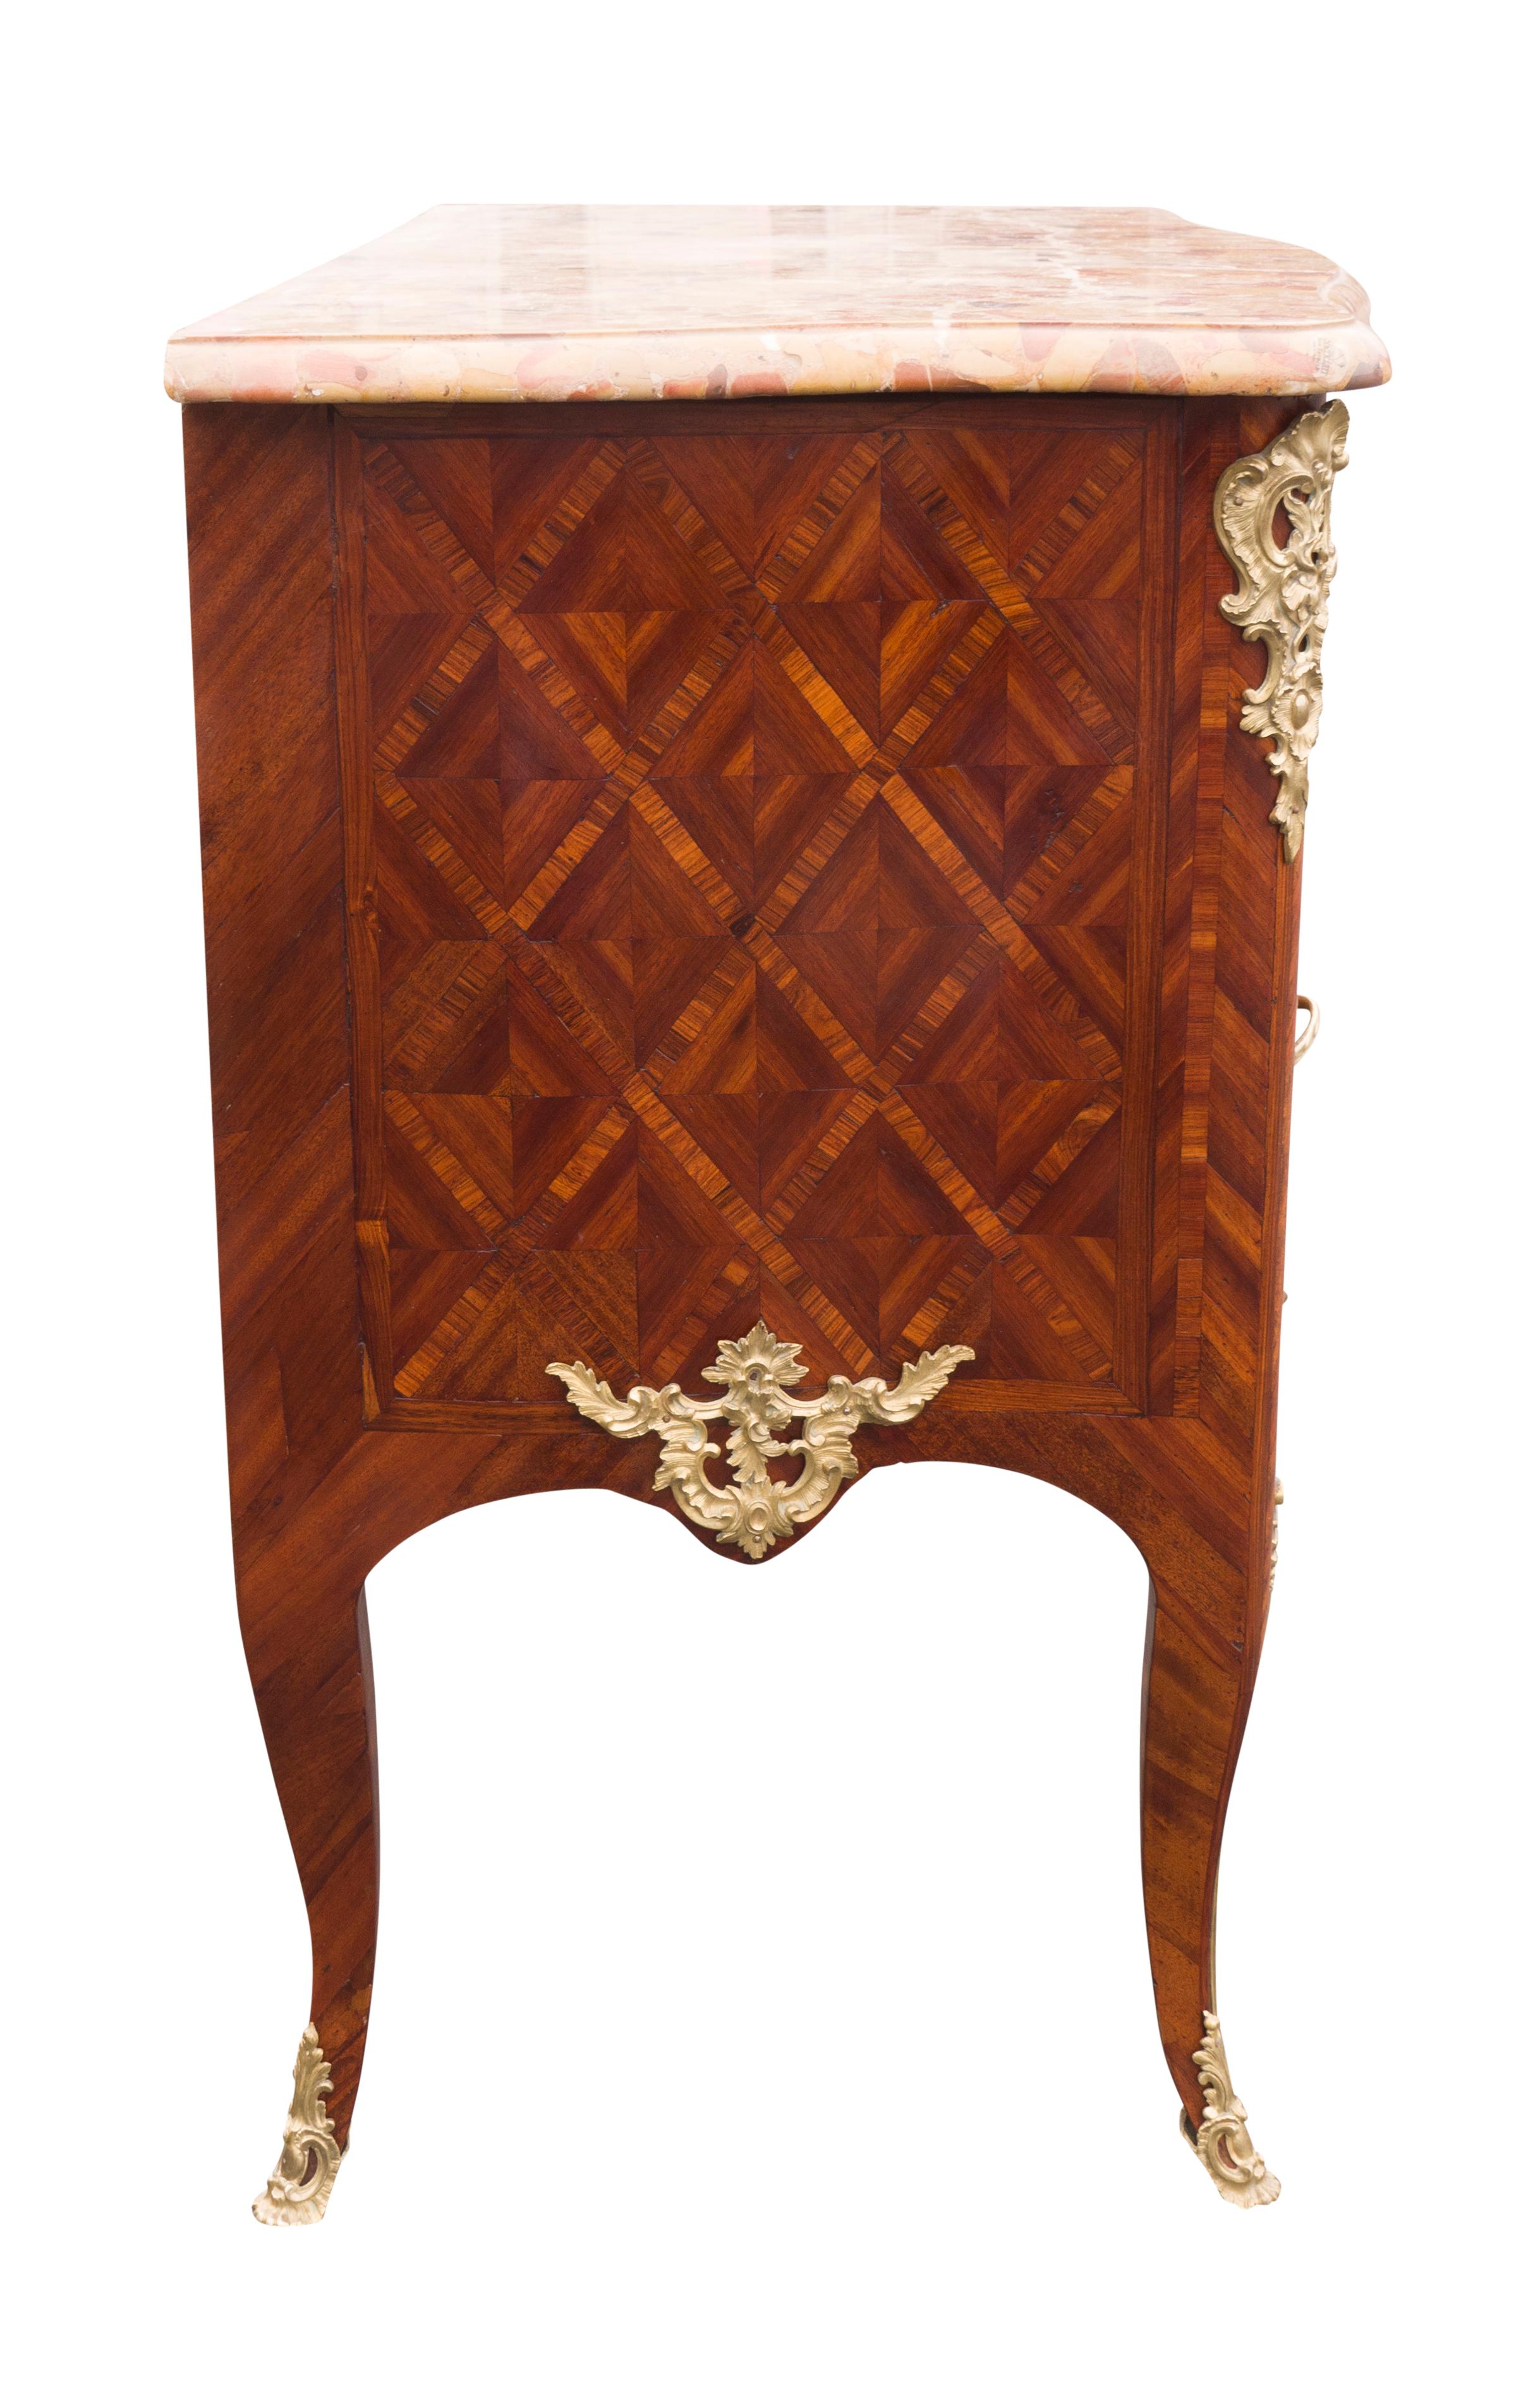 Mid-18th Century Louis XV Kingwood And Parquetry Commode For Sale